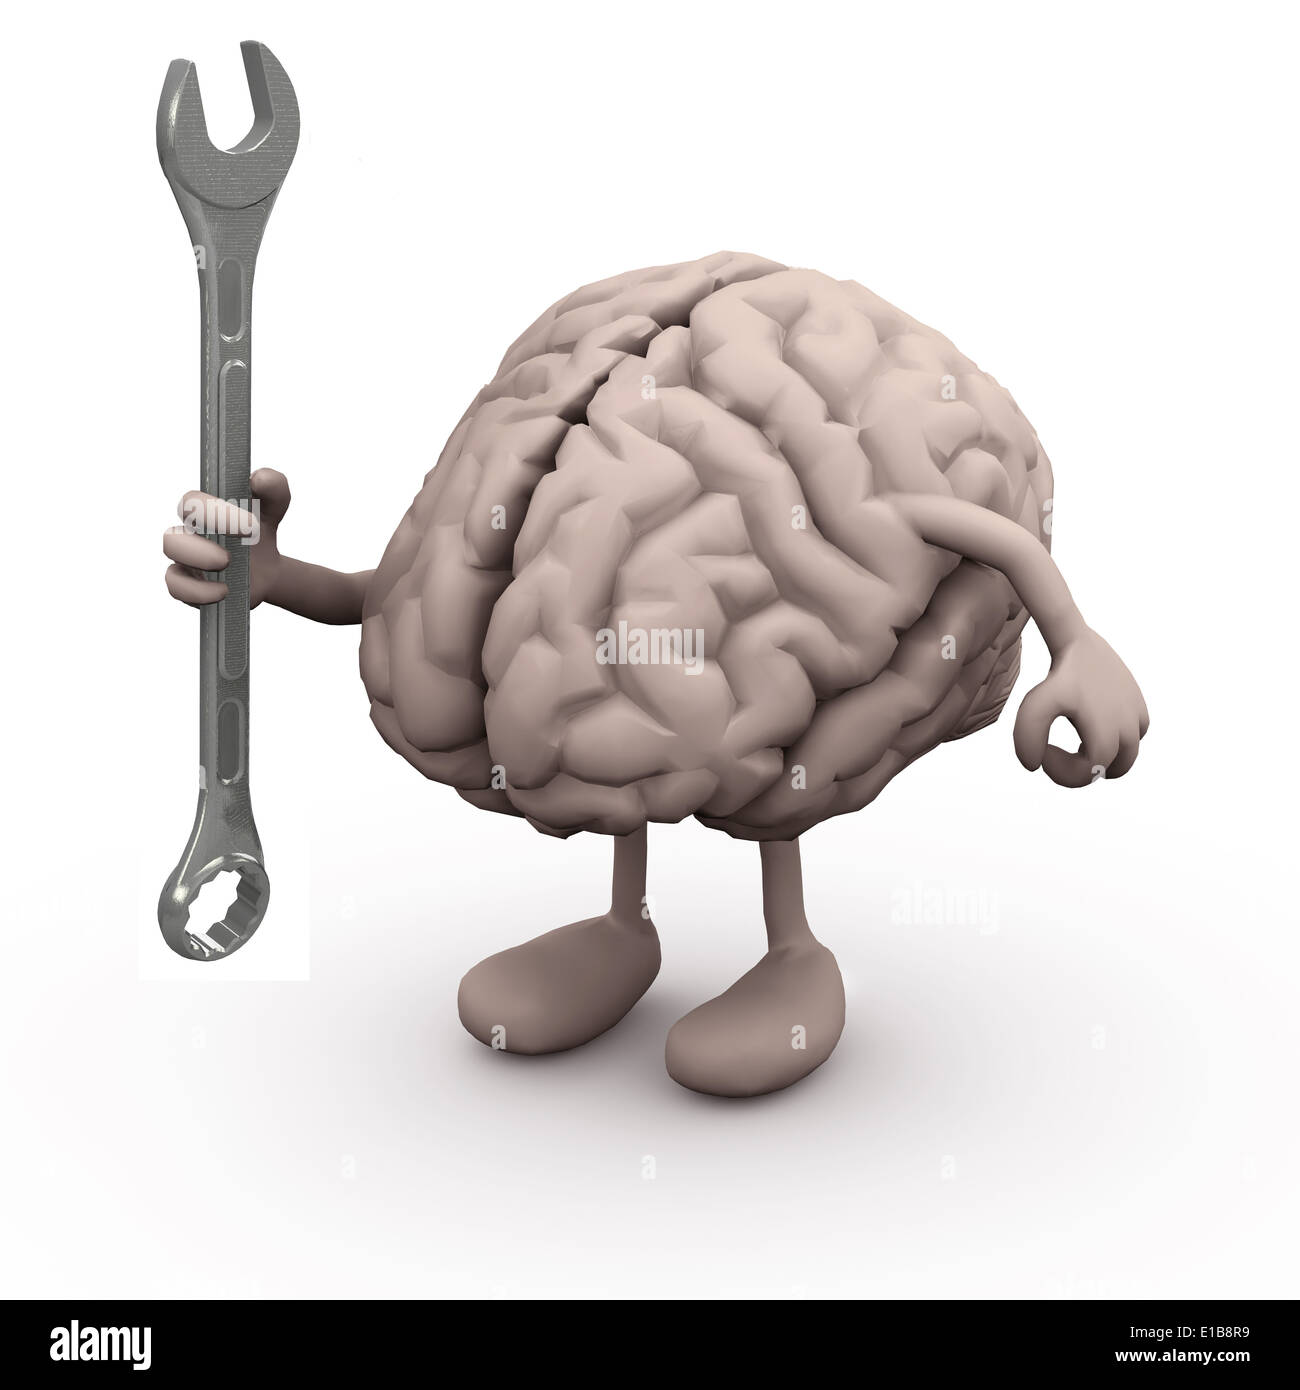 human brain with arms and legs and wrench on hand, 3d illustration Stock Photo